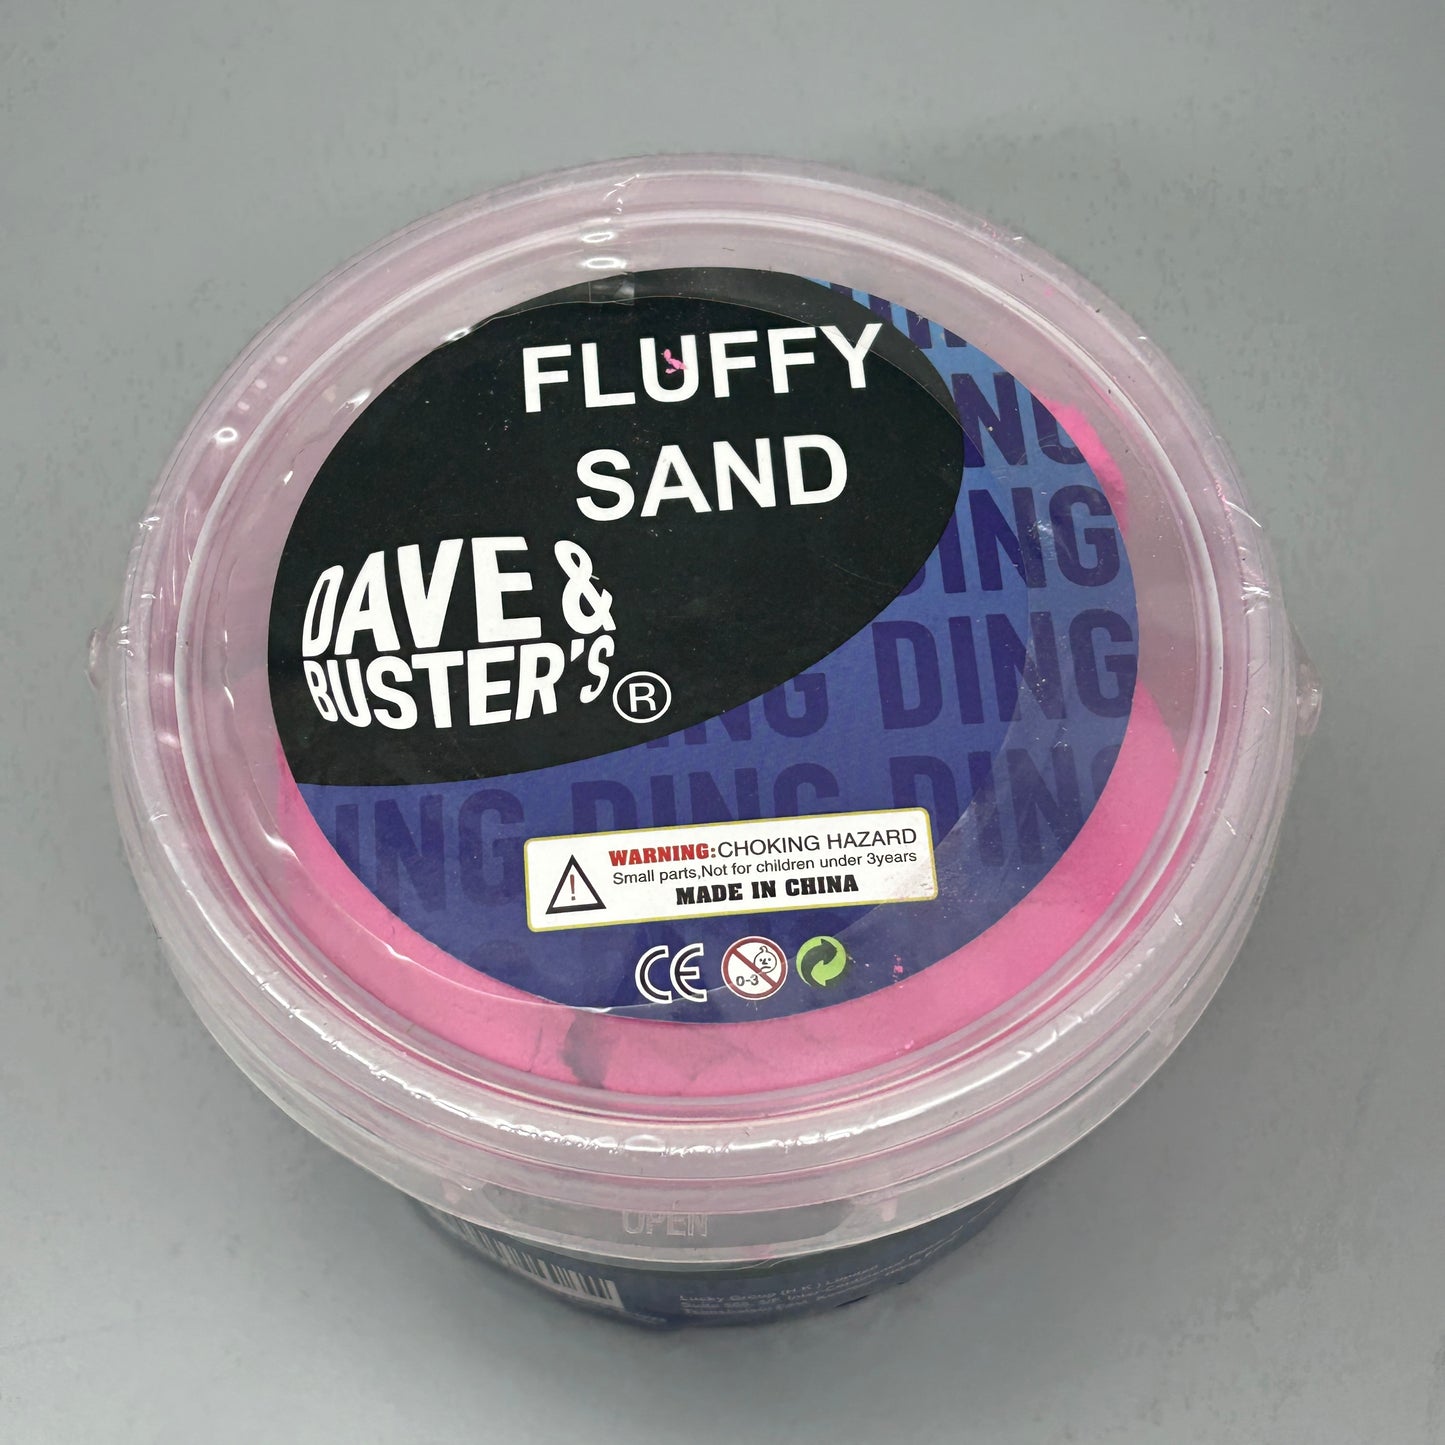 DAVE & BUSTER'S 6-PK! Fluffy Sand Multicolored 18816 (New)